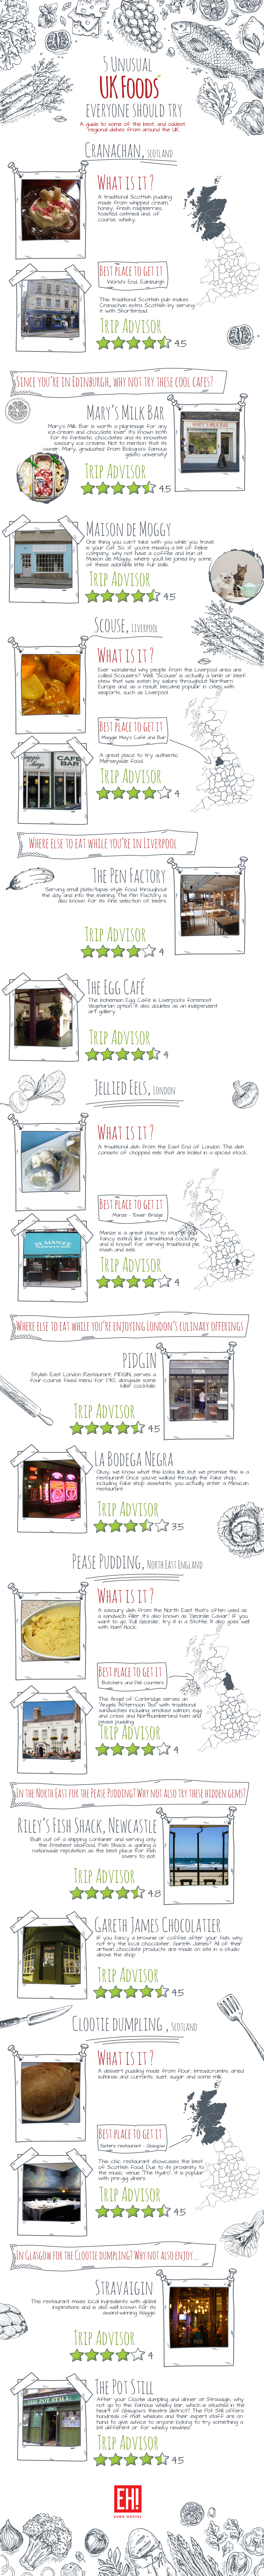 Tourist Guide: 5 Must Try UK Foods - Infographic